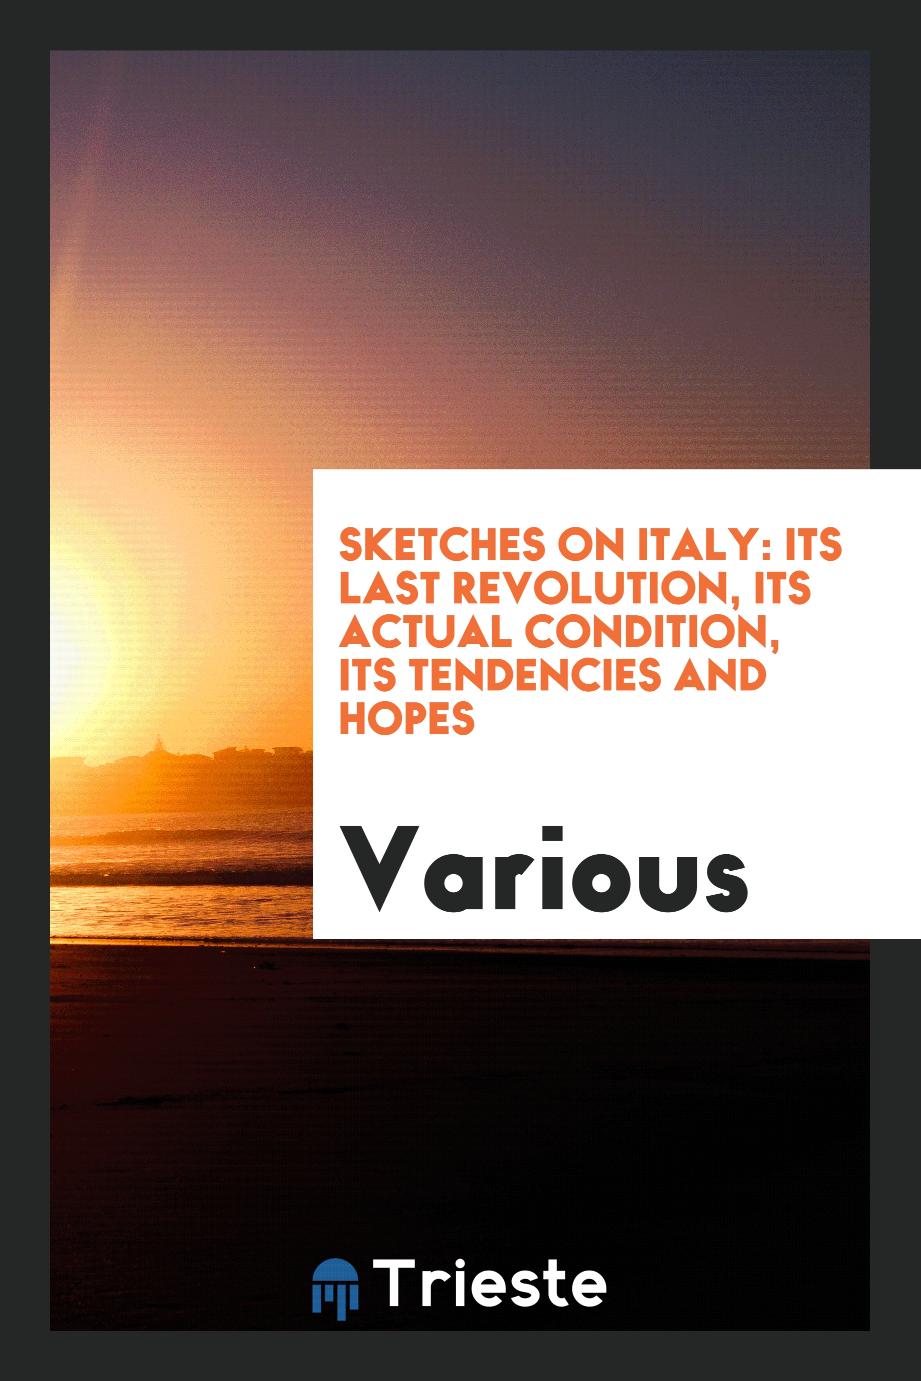 Sketches on Italy: its last revolution, its actual condition, its tendencies and hopes